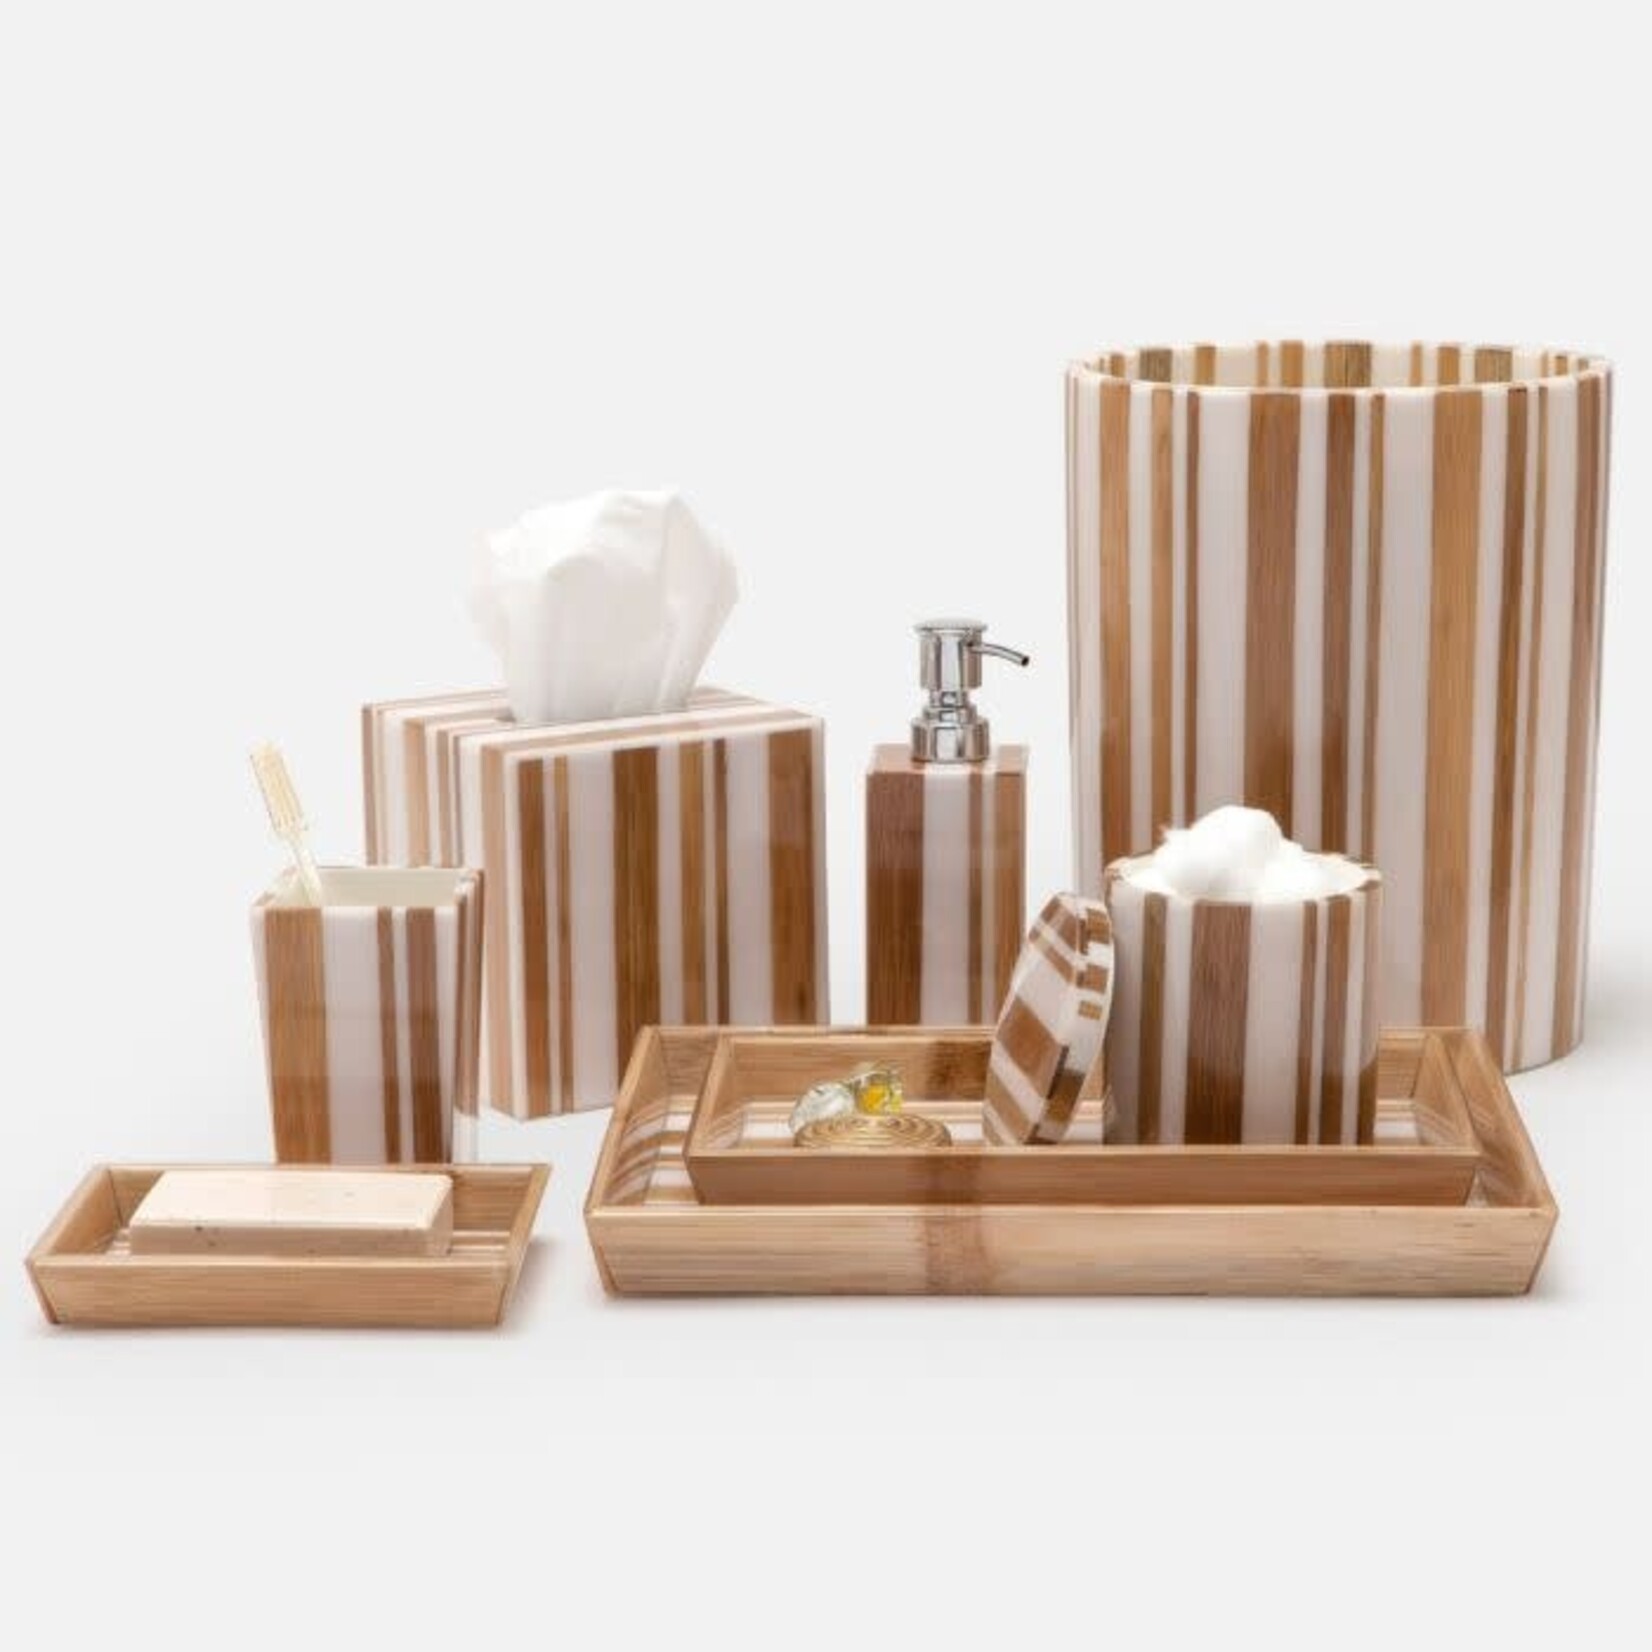 Pigeon and Poodle Ashford Tissue Box Striped Brown Bamboo White Resin